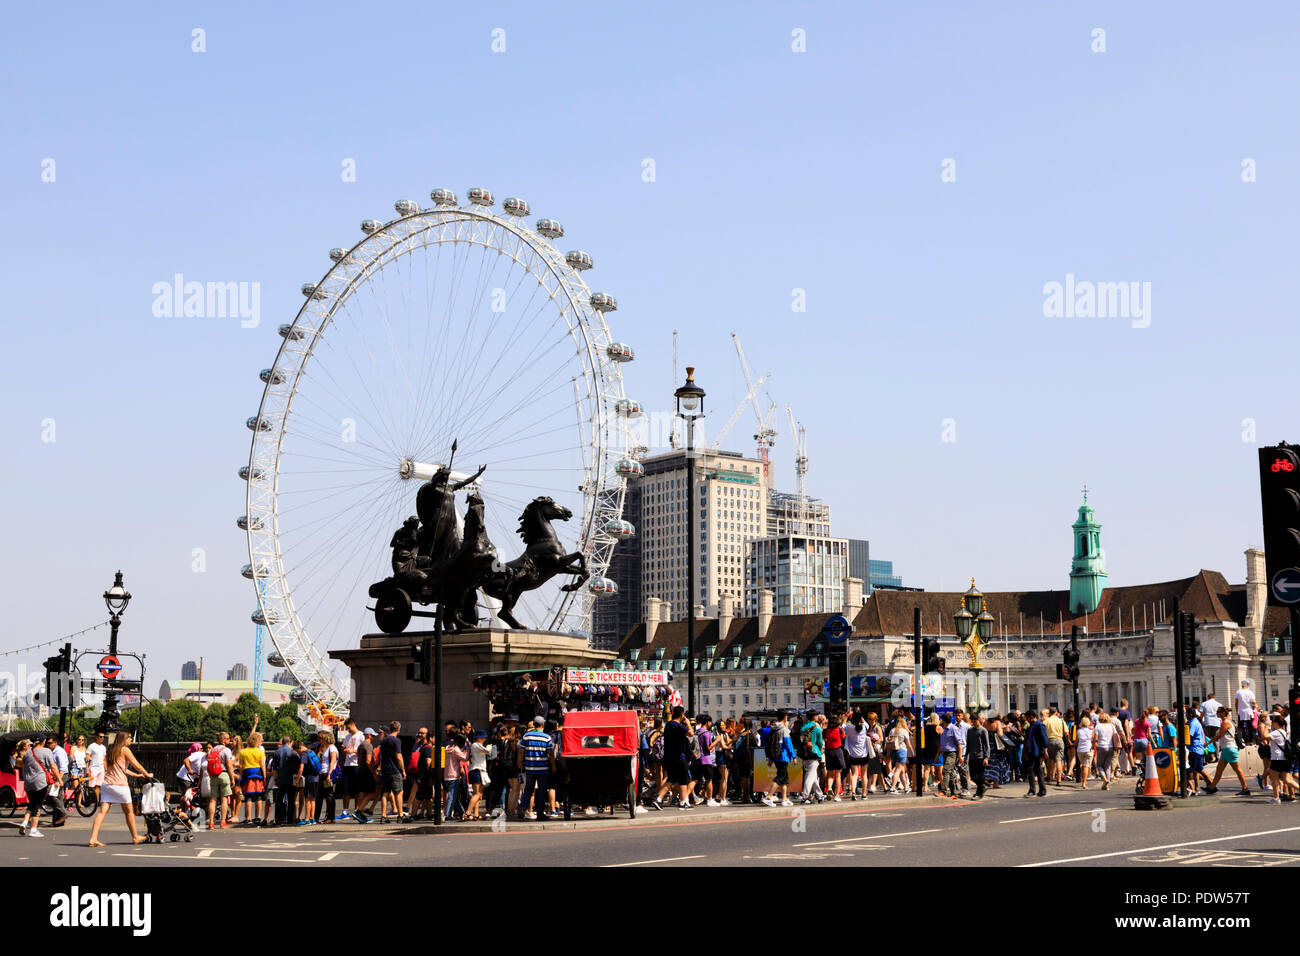 Tourist crowds on Westminster Bridge with The Coca-Cola London Eye ferris wheel on the south bank of the River Thames, Lambeth, London, England Stock Photo